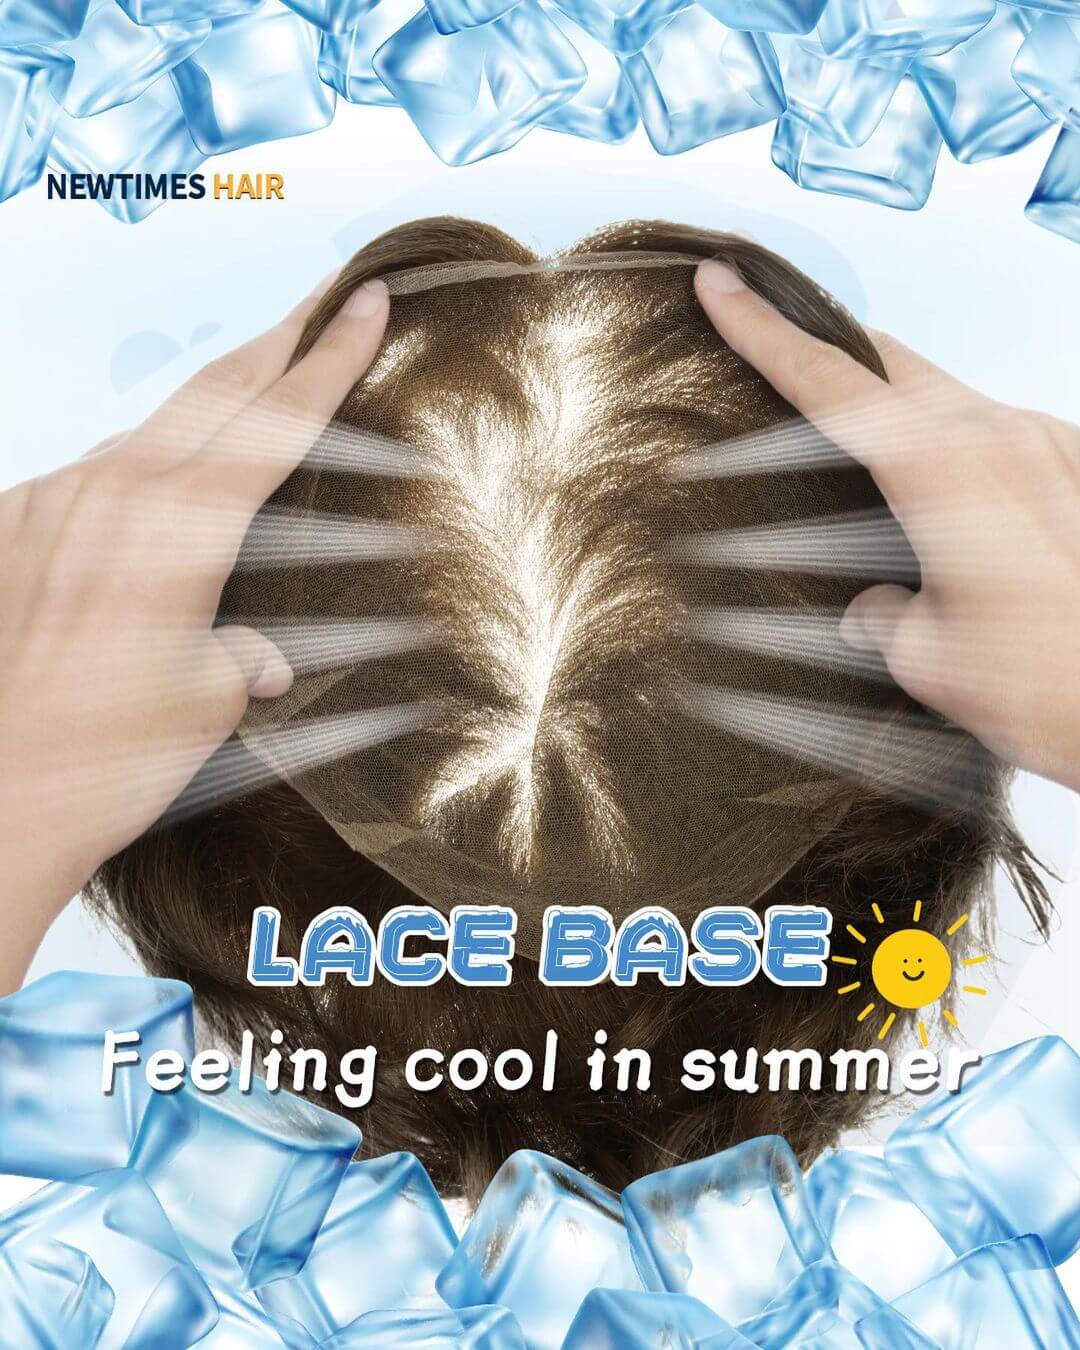 lace-base-will-give-you-an-airy-feel-in-hot-days-new-times-hair